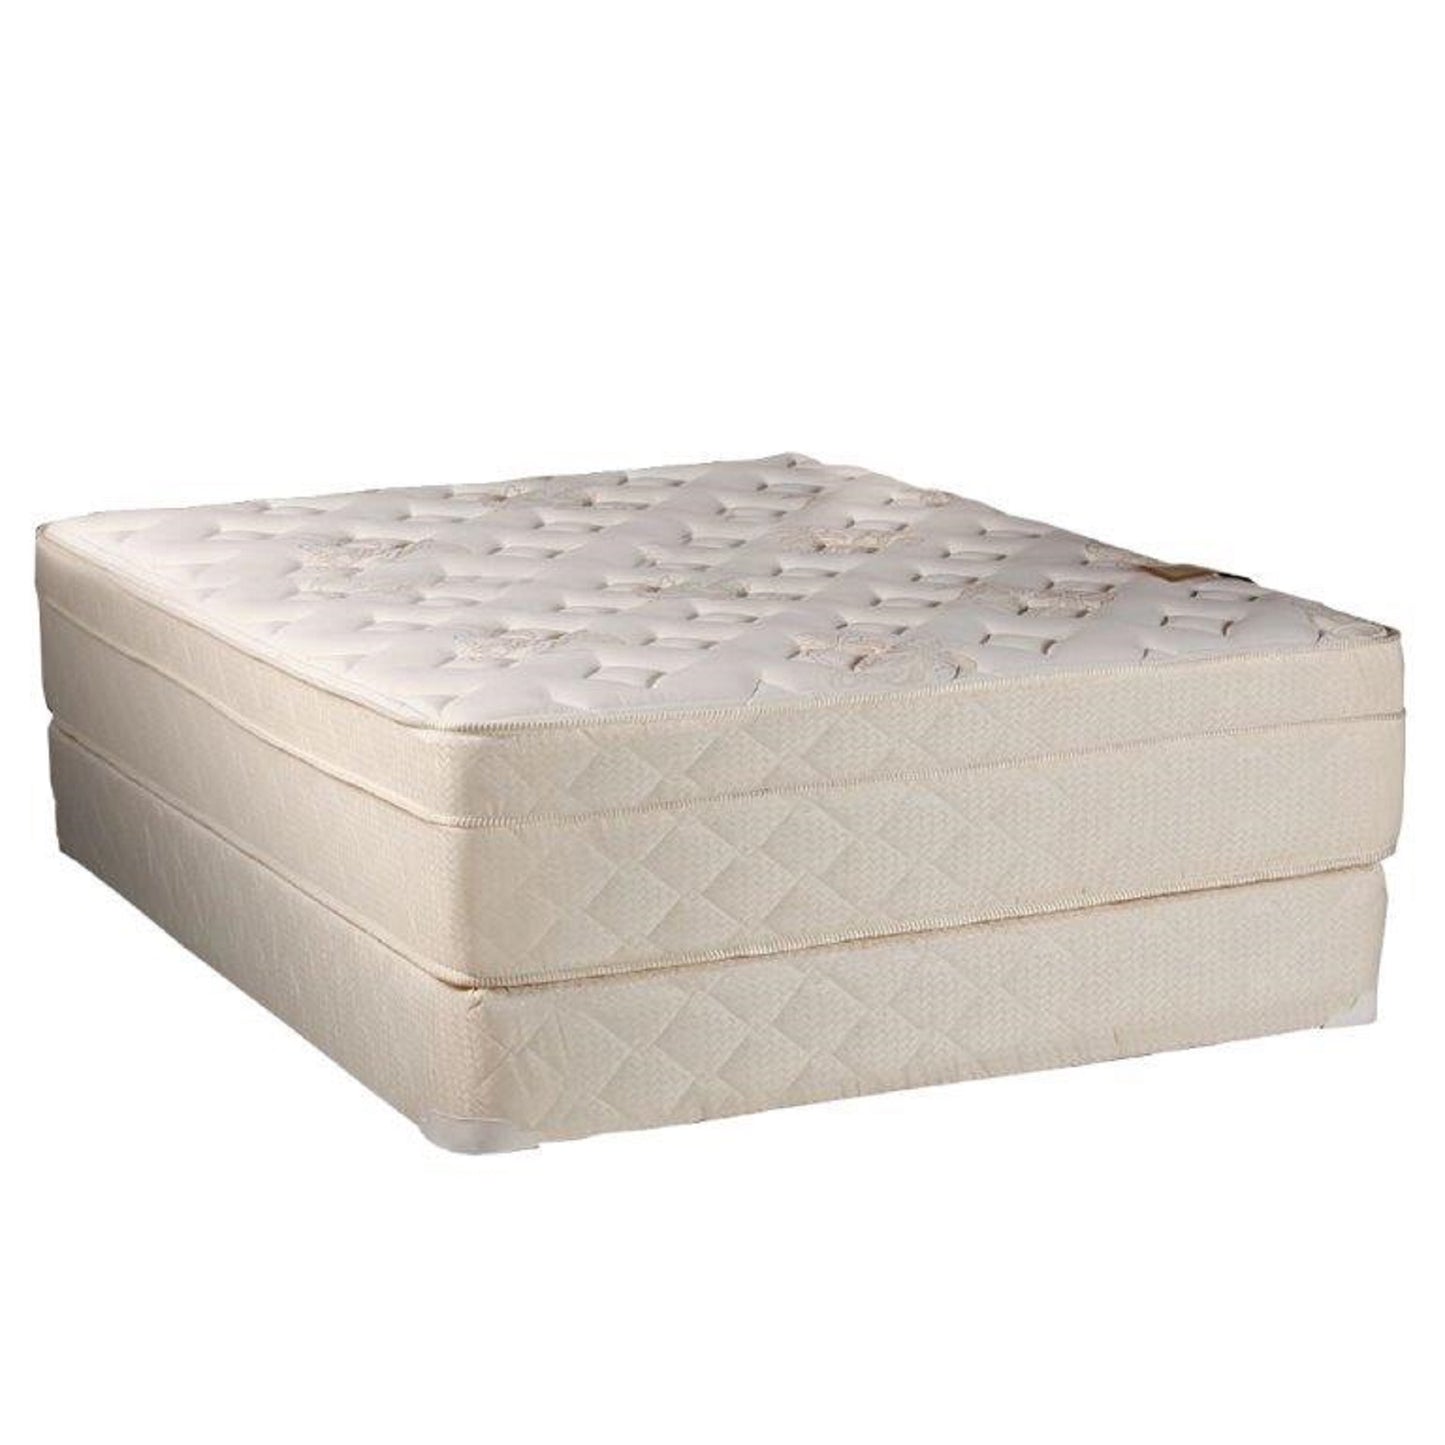 Beverly Hills Firm Foam Encased Eurotop (Pillow Top) Twin Size Mattress and Box Spring Set